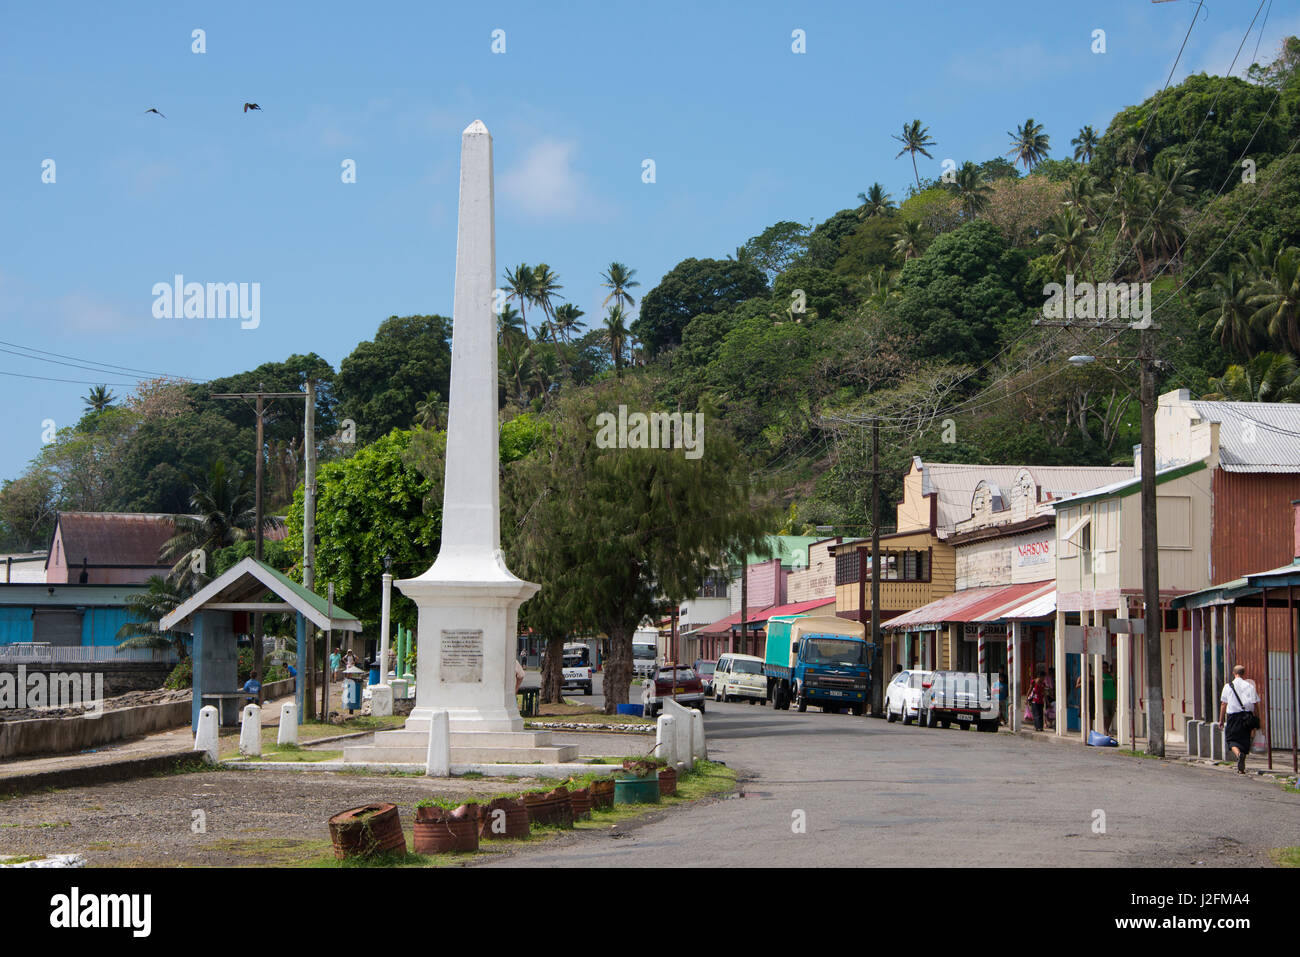 Fiji, Island of Ovalua, port town of Levuka. Considered to be the most intact Colonial town remaining in Fiji. UNESCO World Heritage Site. Downtown war memorial. (Large format sizes available) Stock Photo